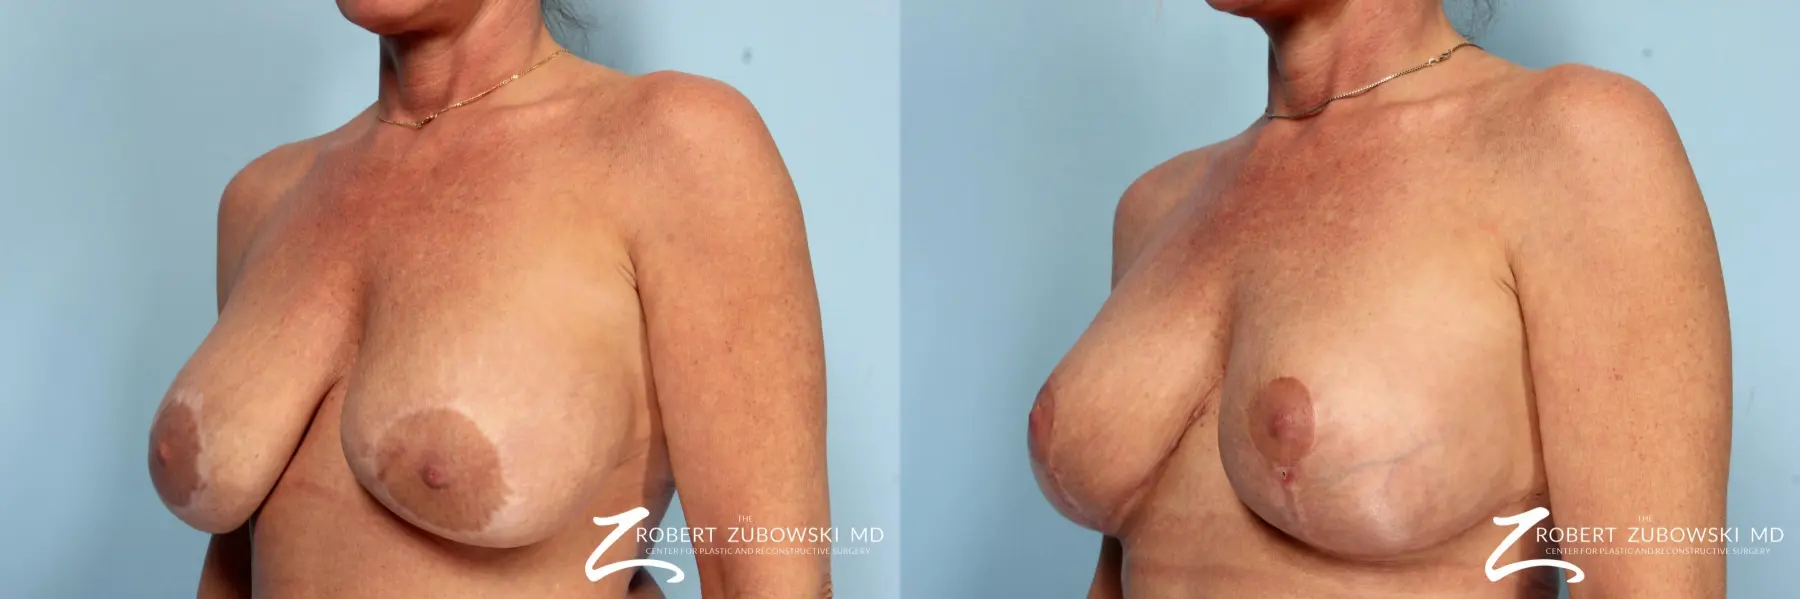 Breast Lift And Augmentation: Patient 17 - Before and After 2